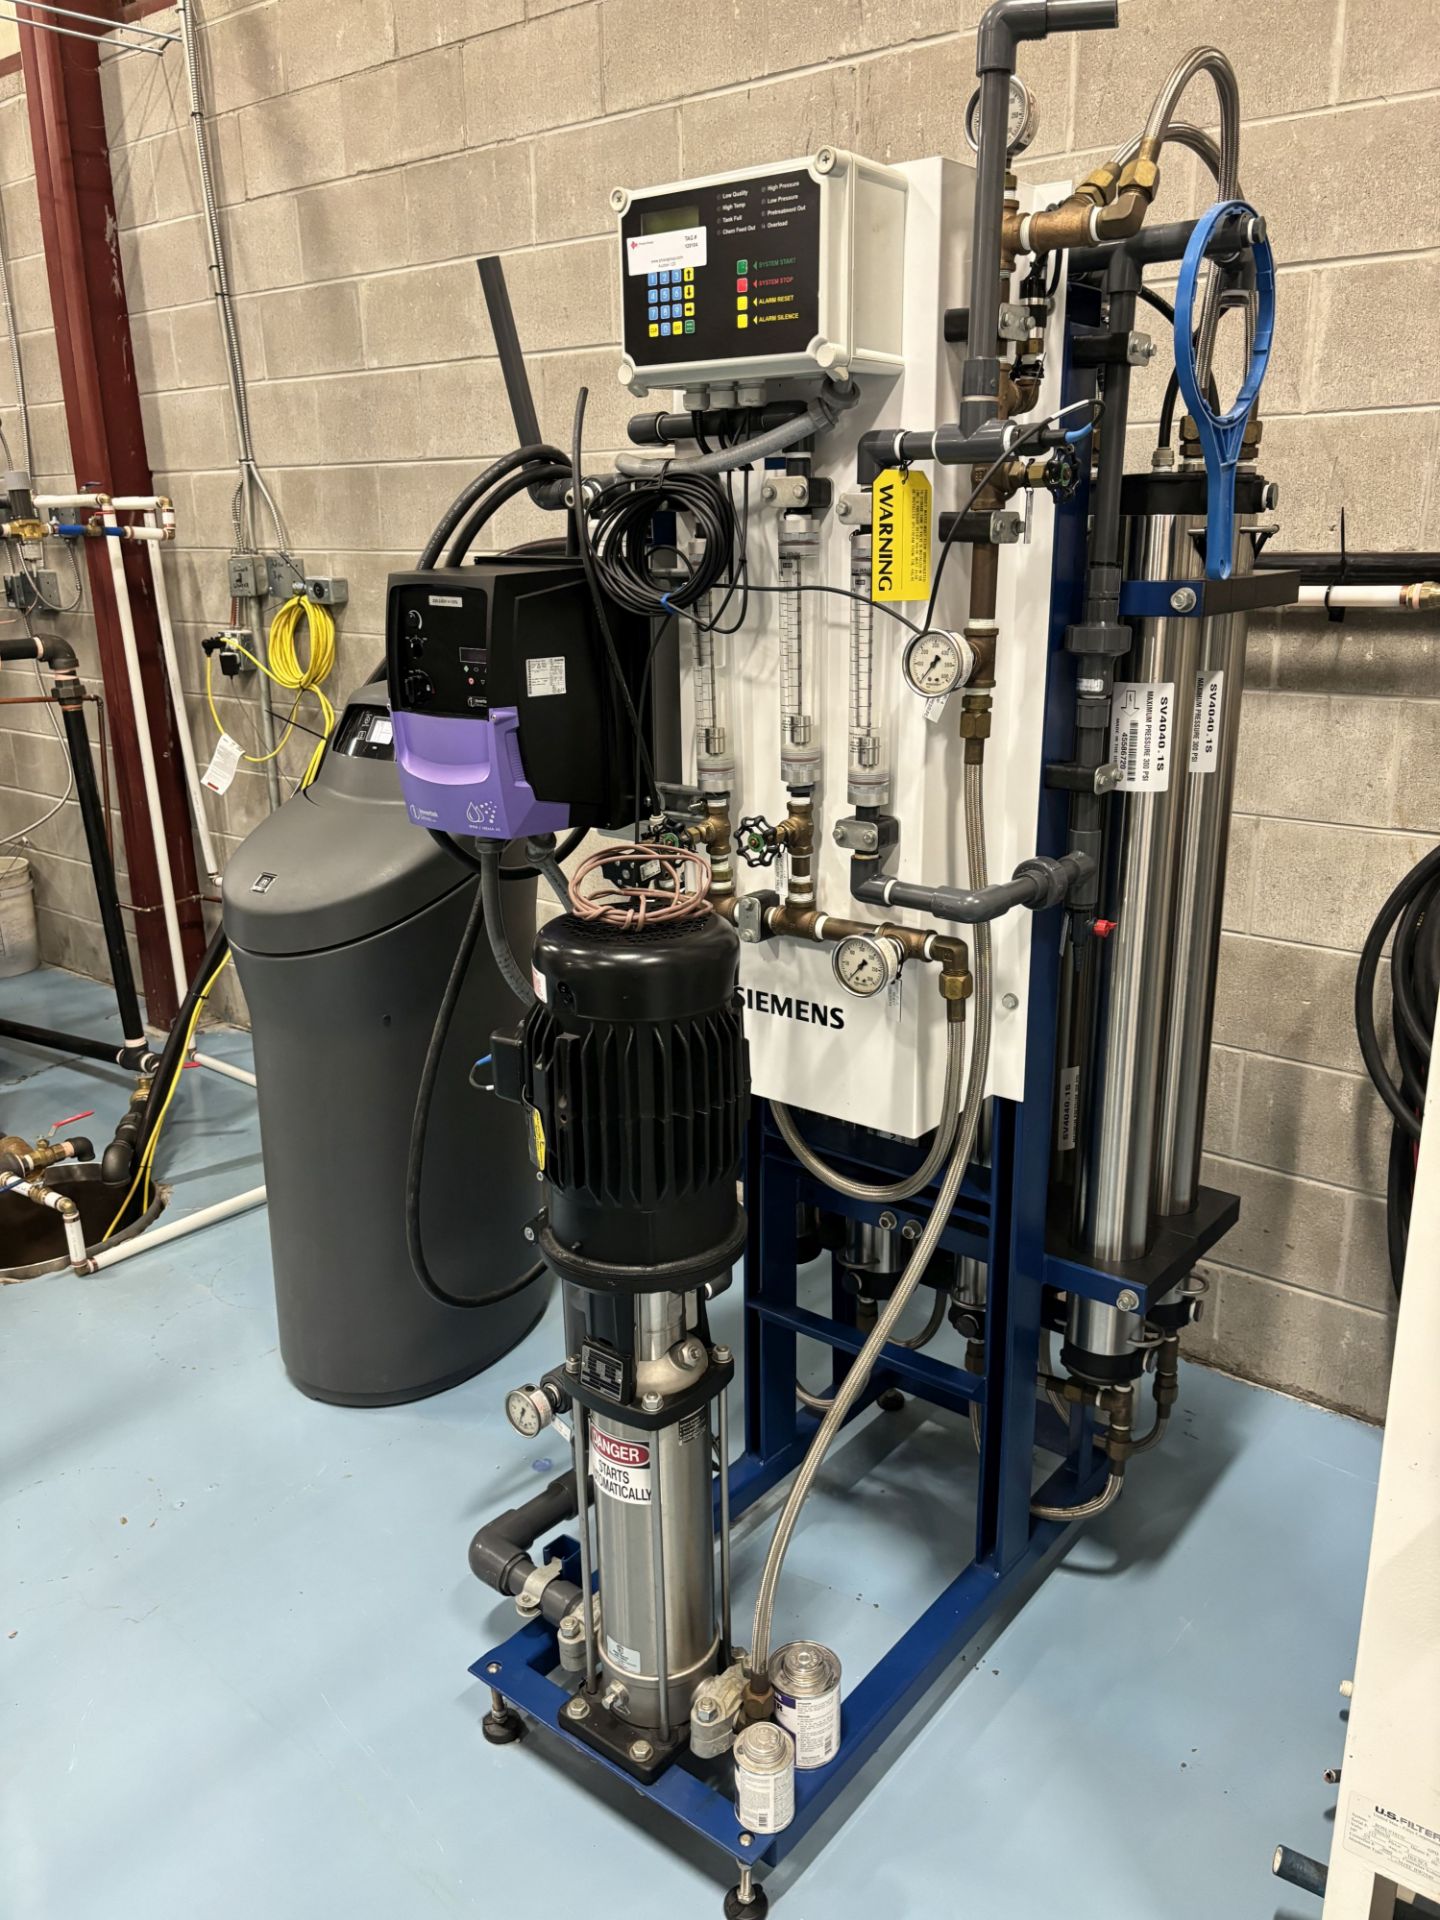 Siemens RO Water System - Reverse Osmosis Water System